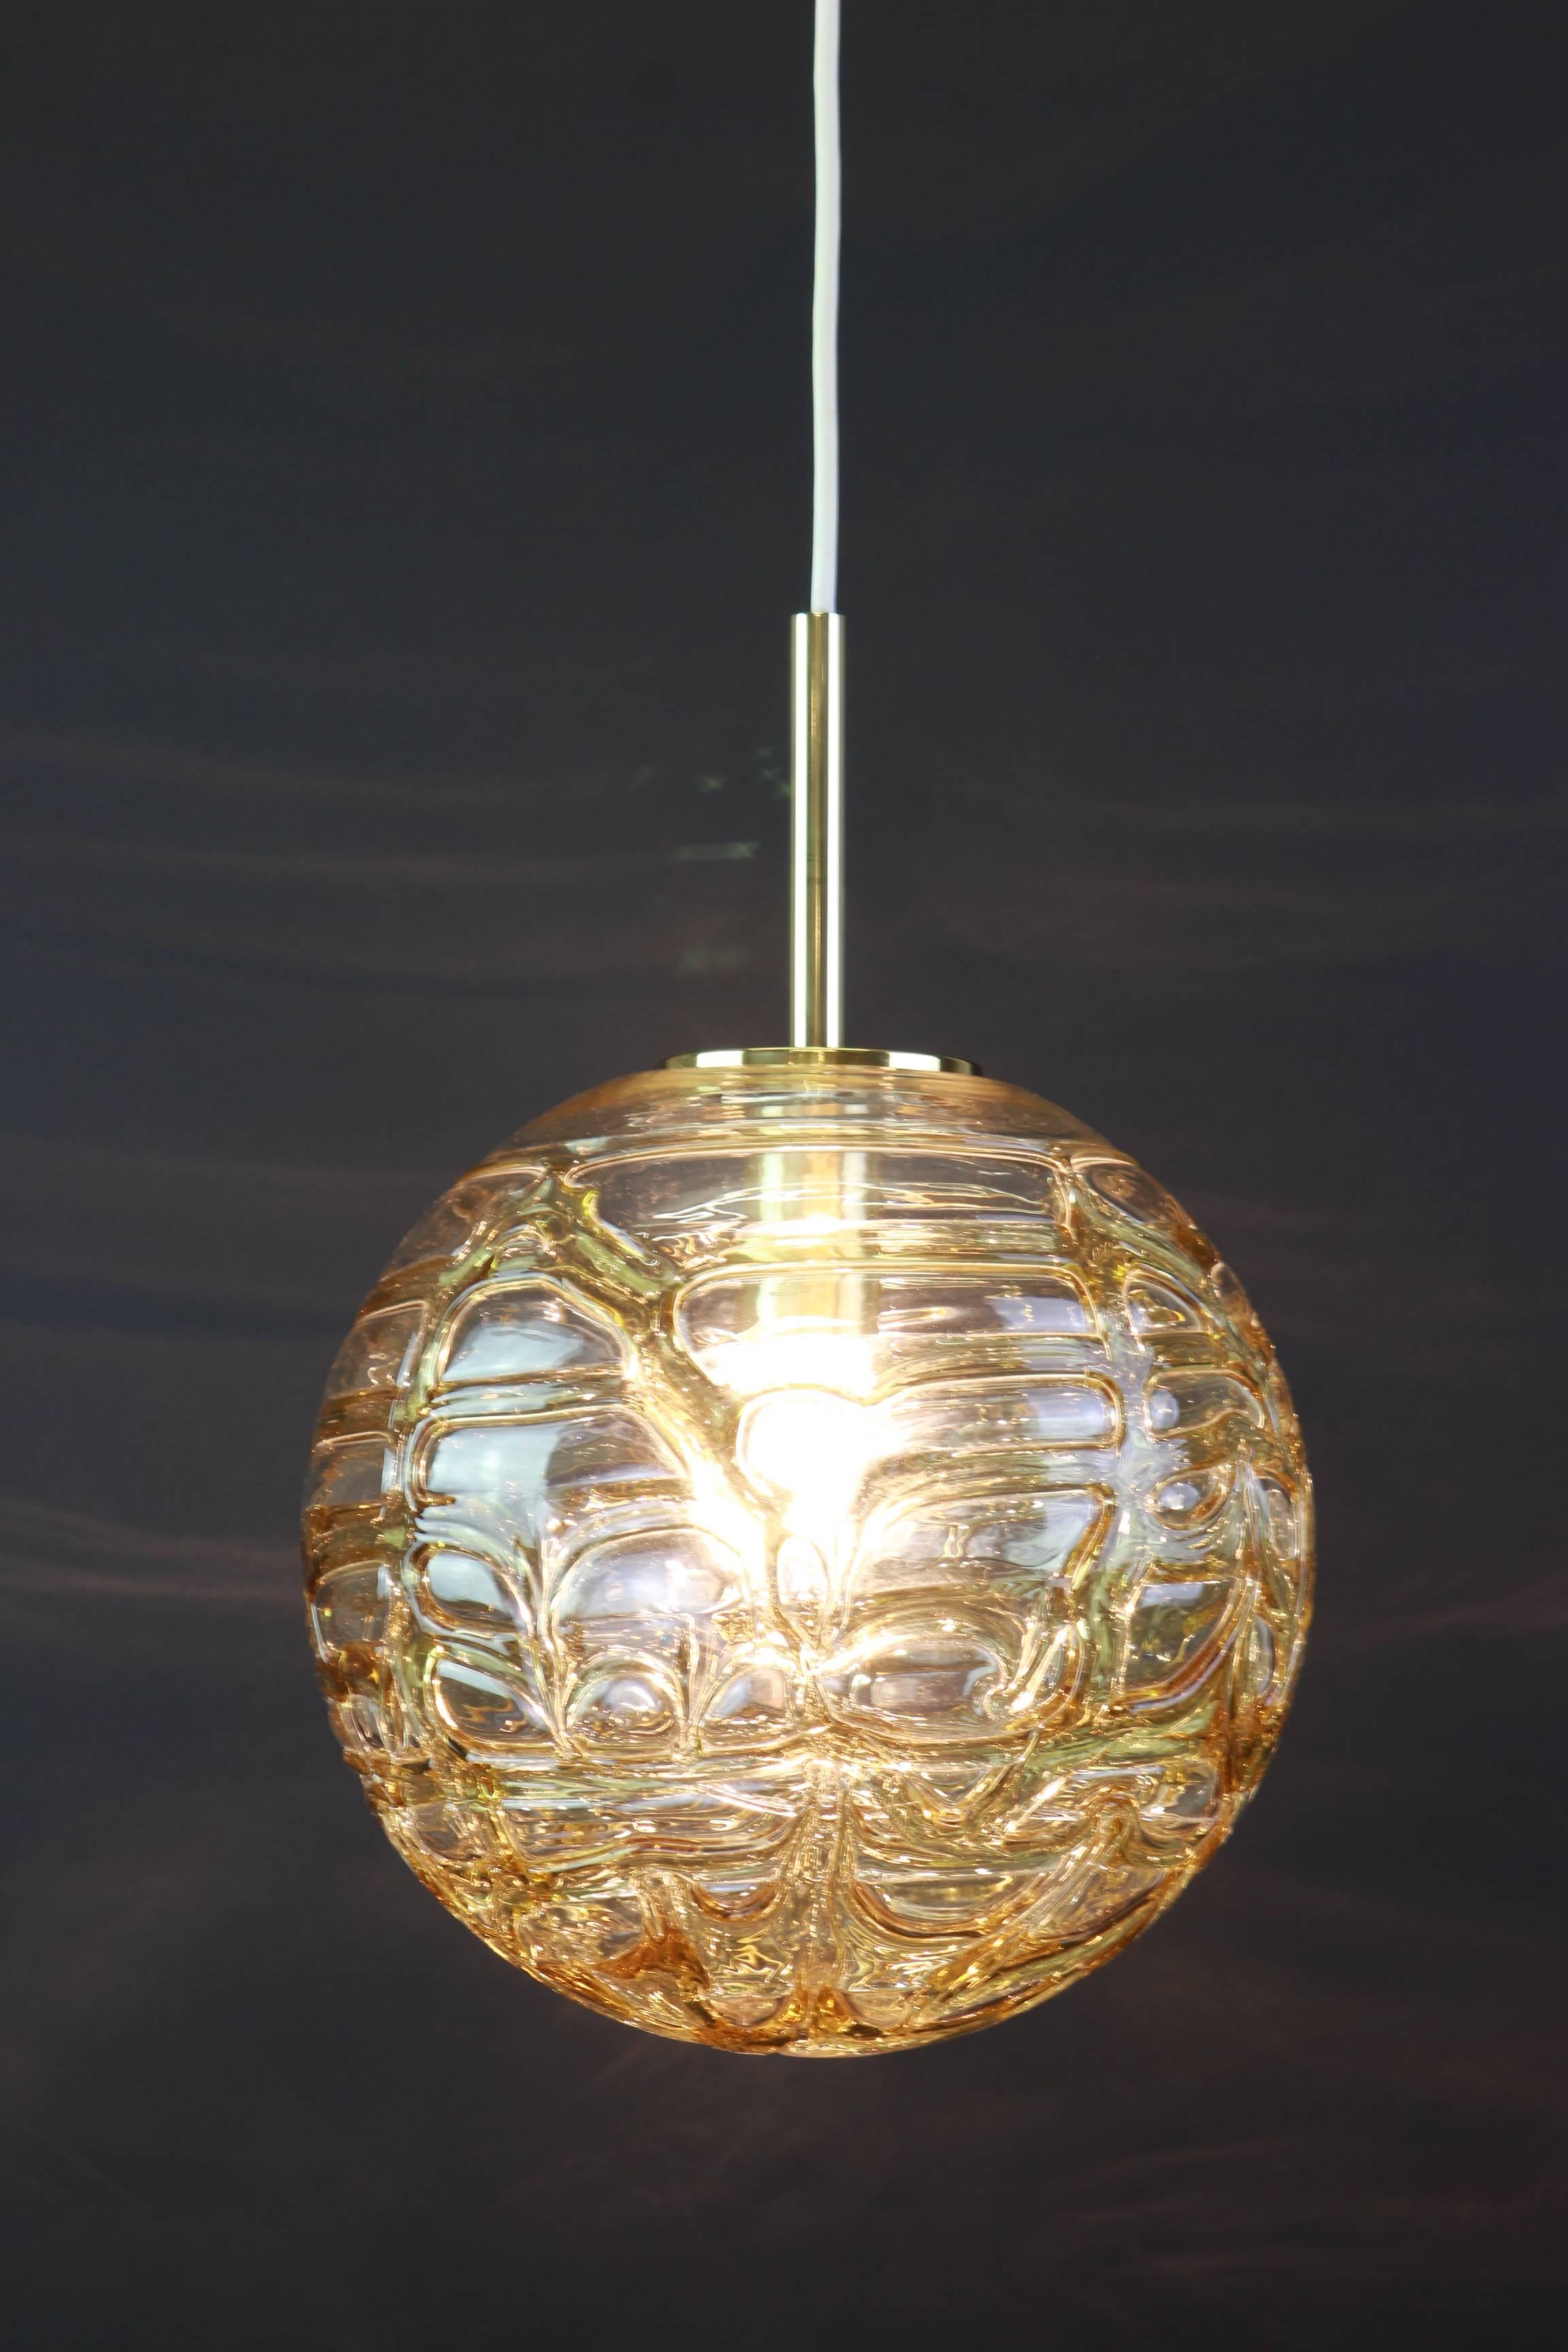 Mid-Century Modern 1 of 3 Rare Murano Ball Pendant Light by Doria, Germany, 1970s For Sale